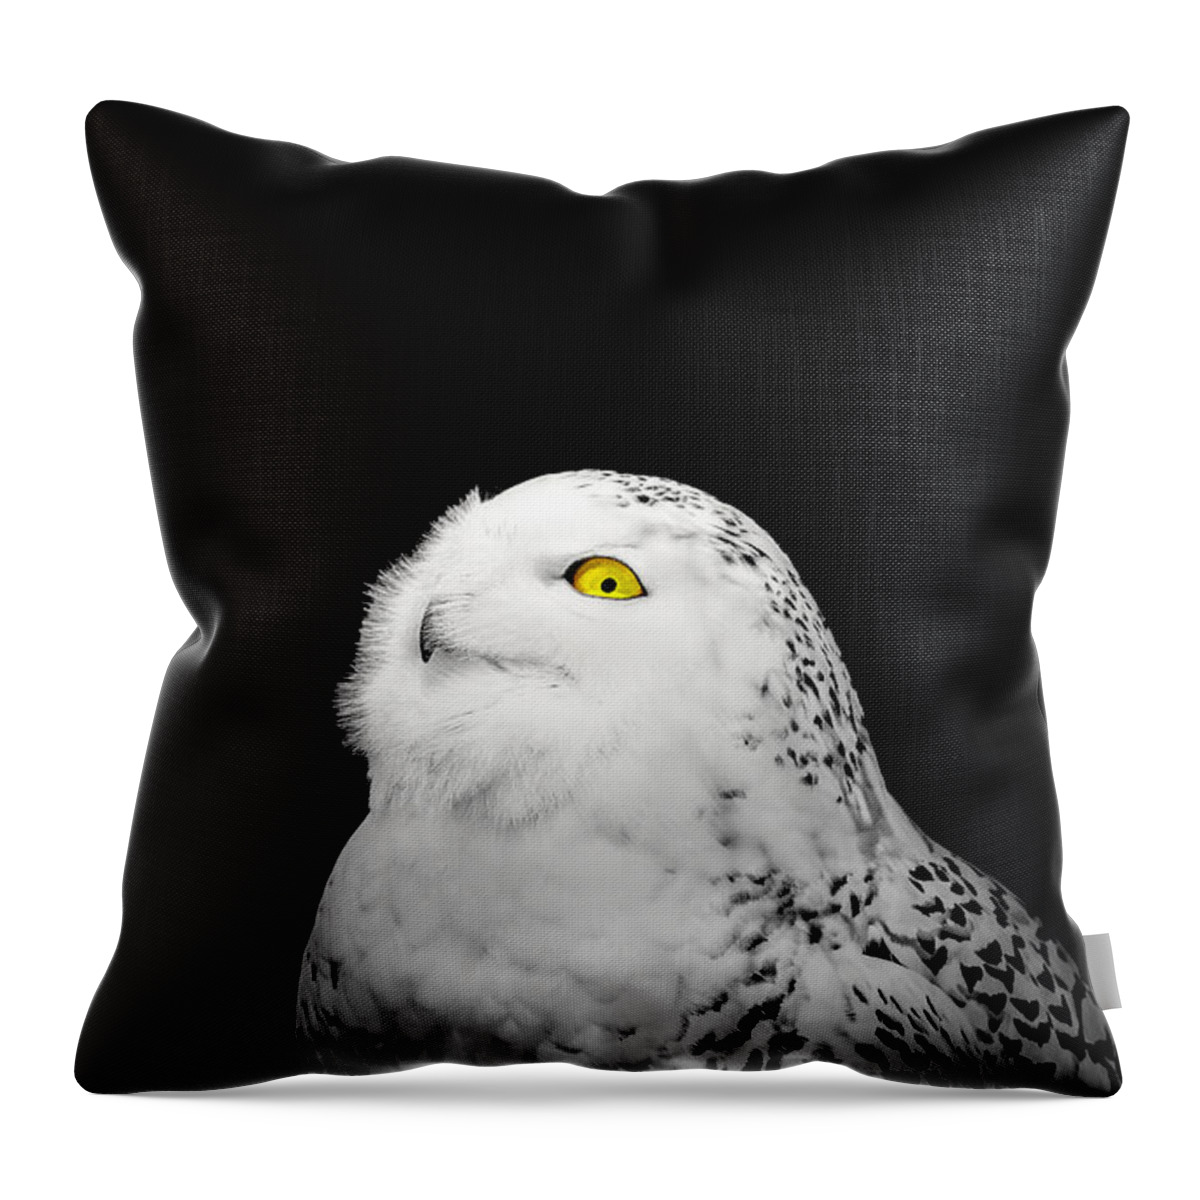 Animal Throw Pillow featuring the photograph Snowy Owl by Peter Lakomy